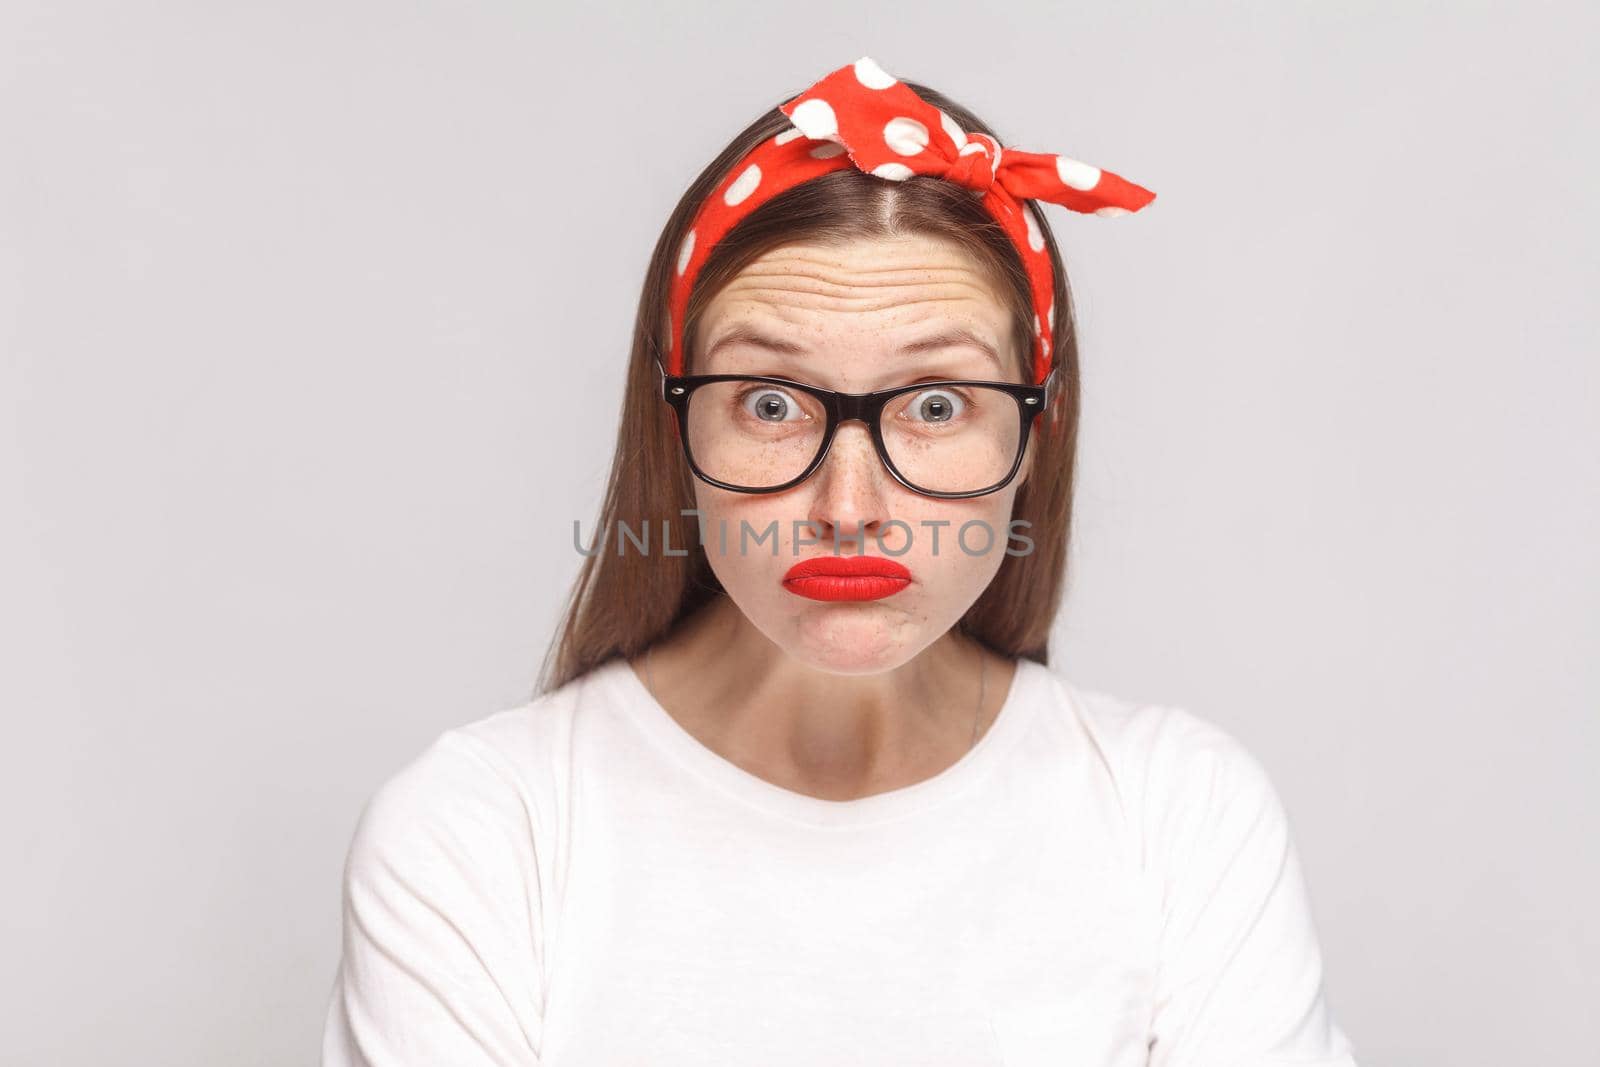 big eyes shocked face of beautiful emotional young woman in white t-shirt with freckles, black glasses, red lips and head band looking at camera. indoor studio shot, isolated on light gray background.